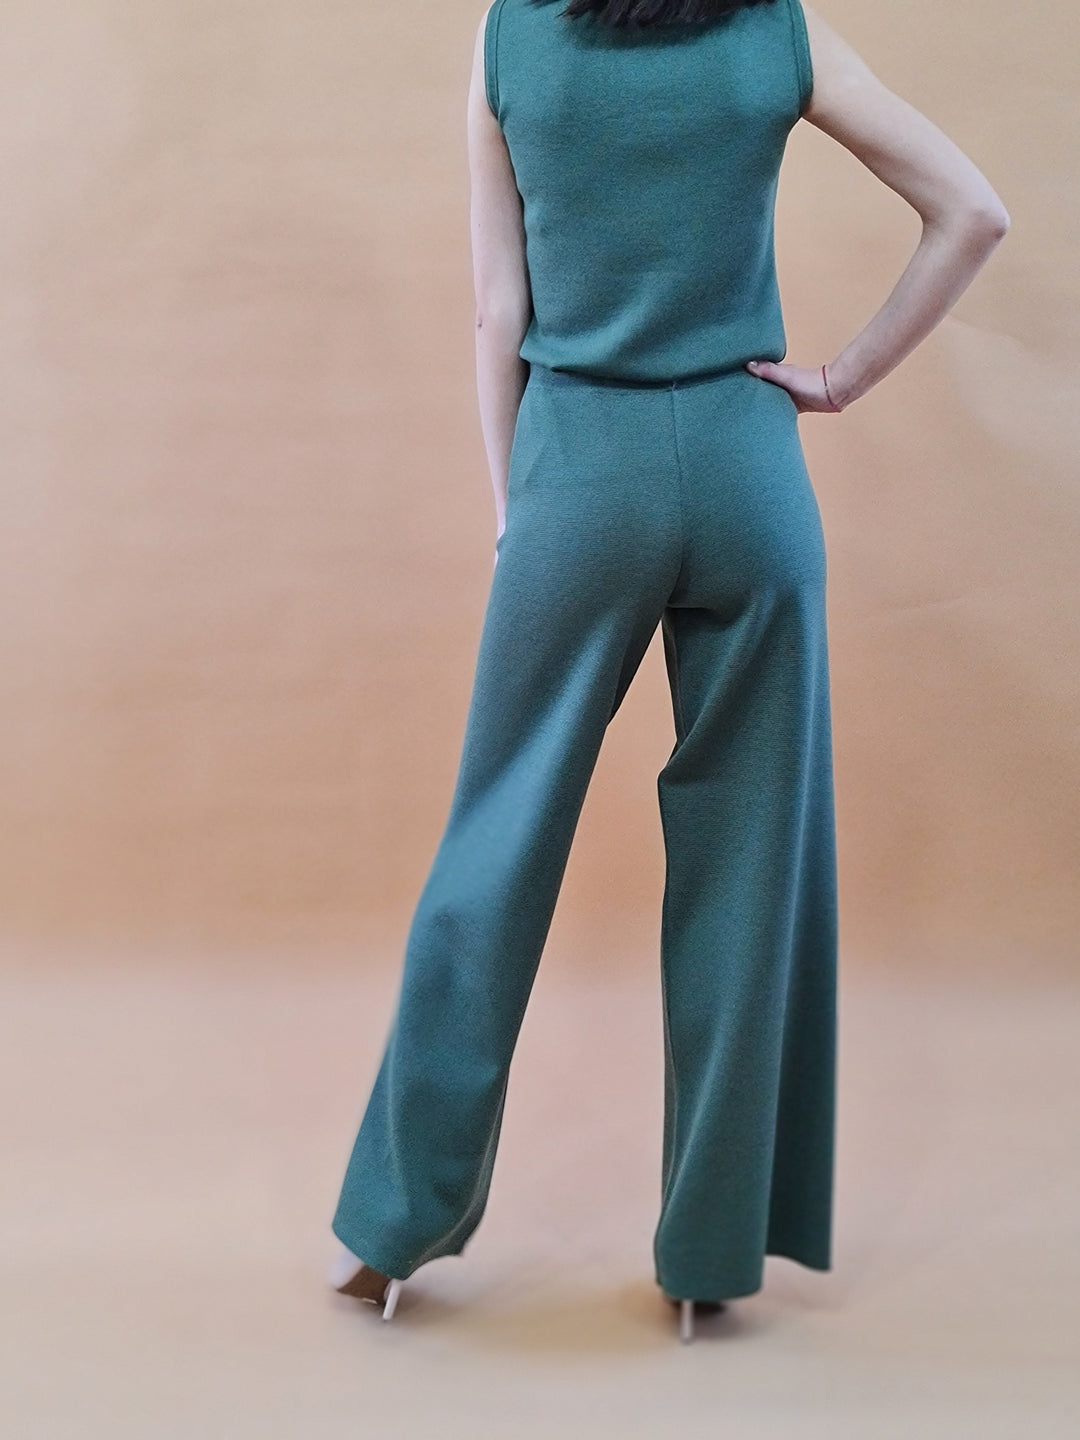 Woman in stylish green sleeveless top and wide-leg pants standing against a plain background